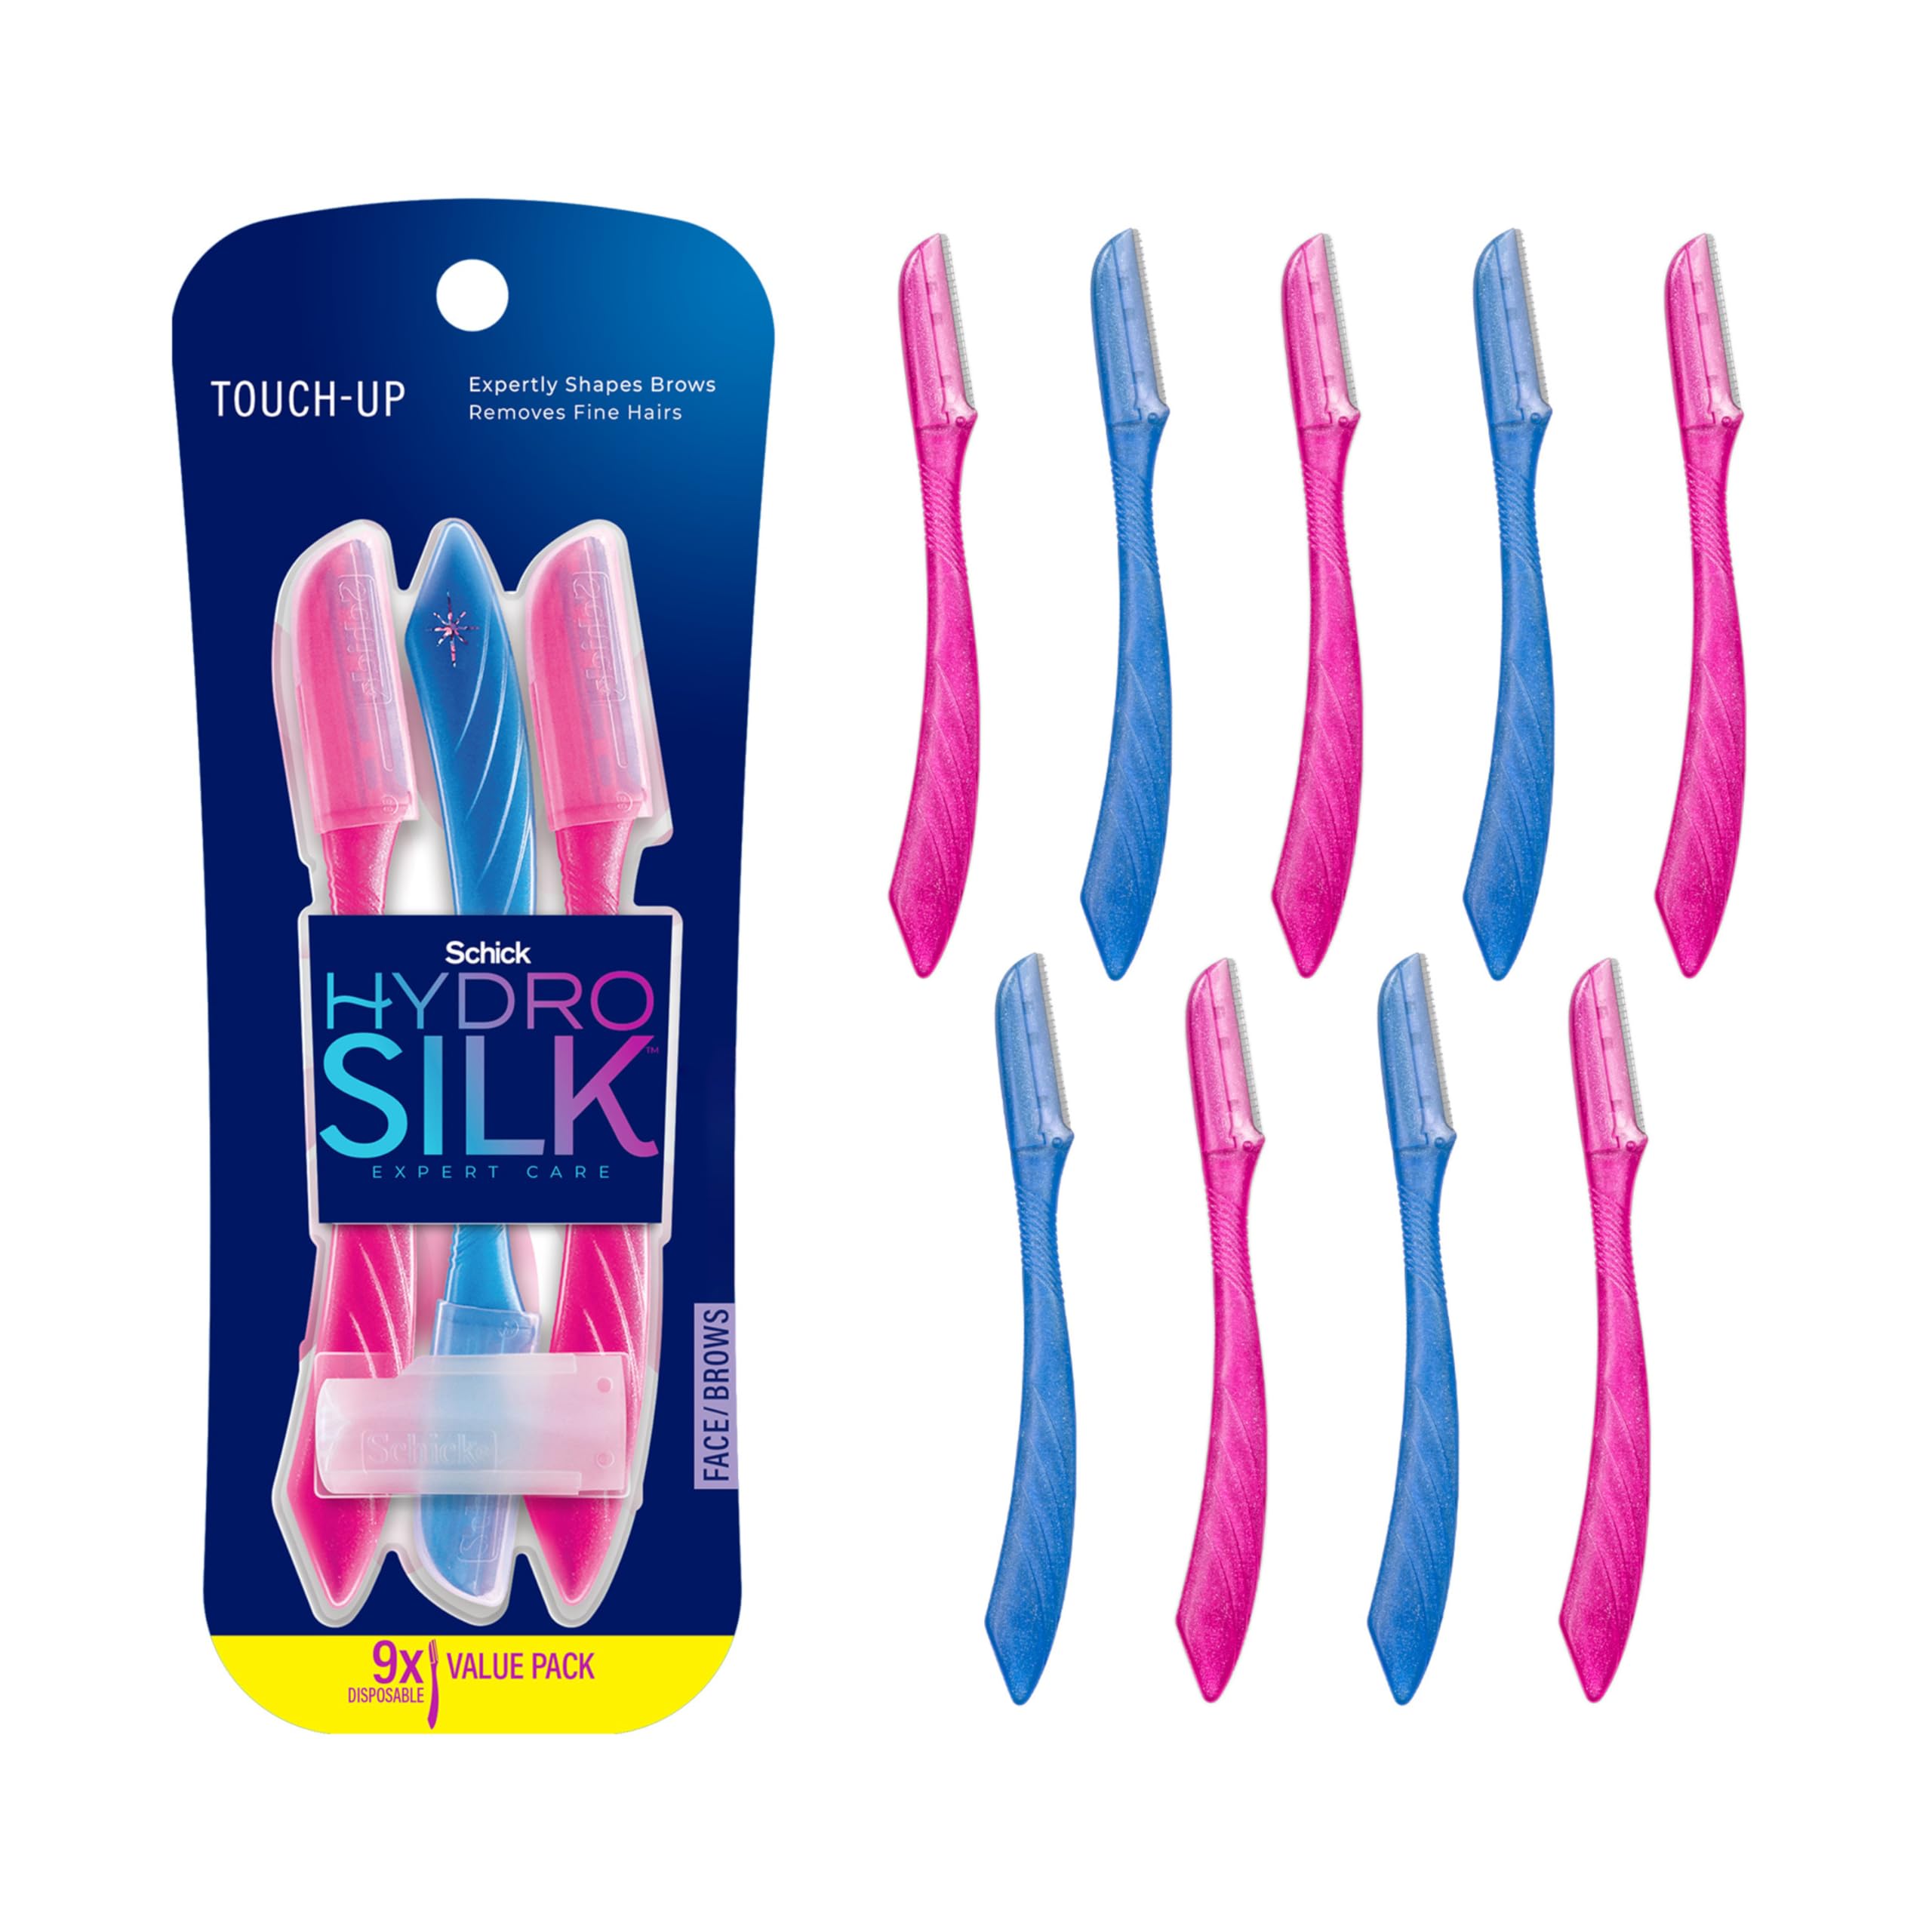 9-Count Schick Hydro Silk Touch-Up Dermaplaning Tool $9.74 + Free Shipping w/ Prime or on $35+